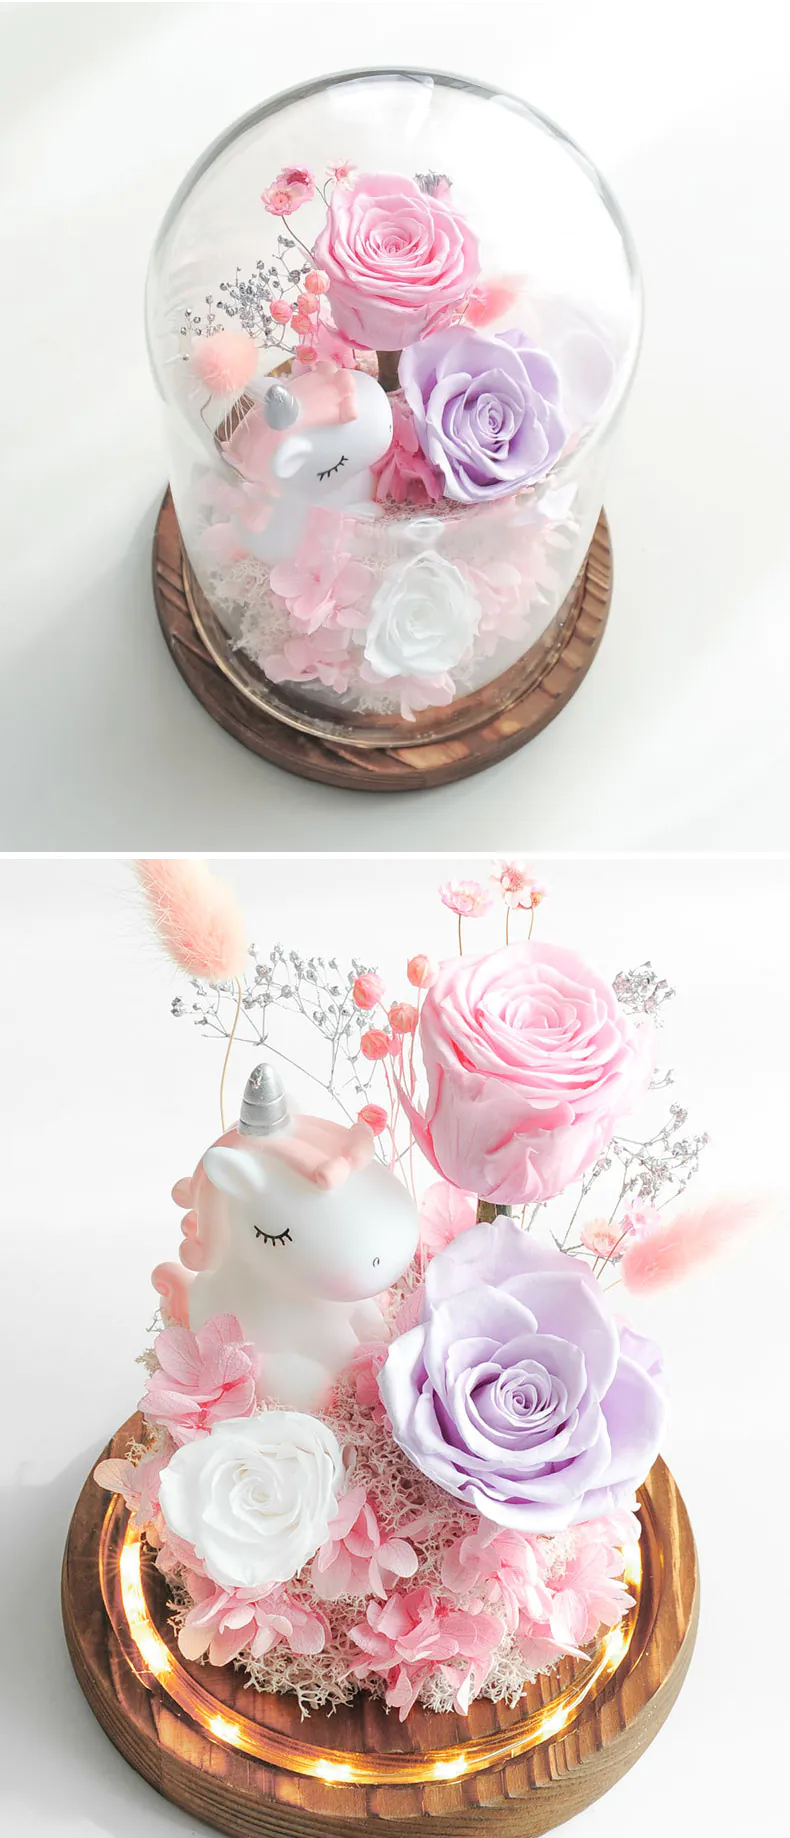 Eternal-Preserved-Real-Rose-Unicorn-Valentines-Day-Anniversary-Gift09